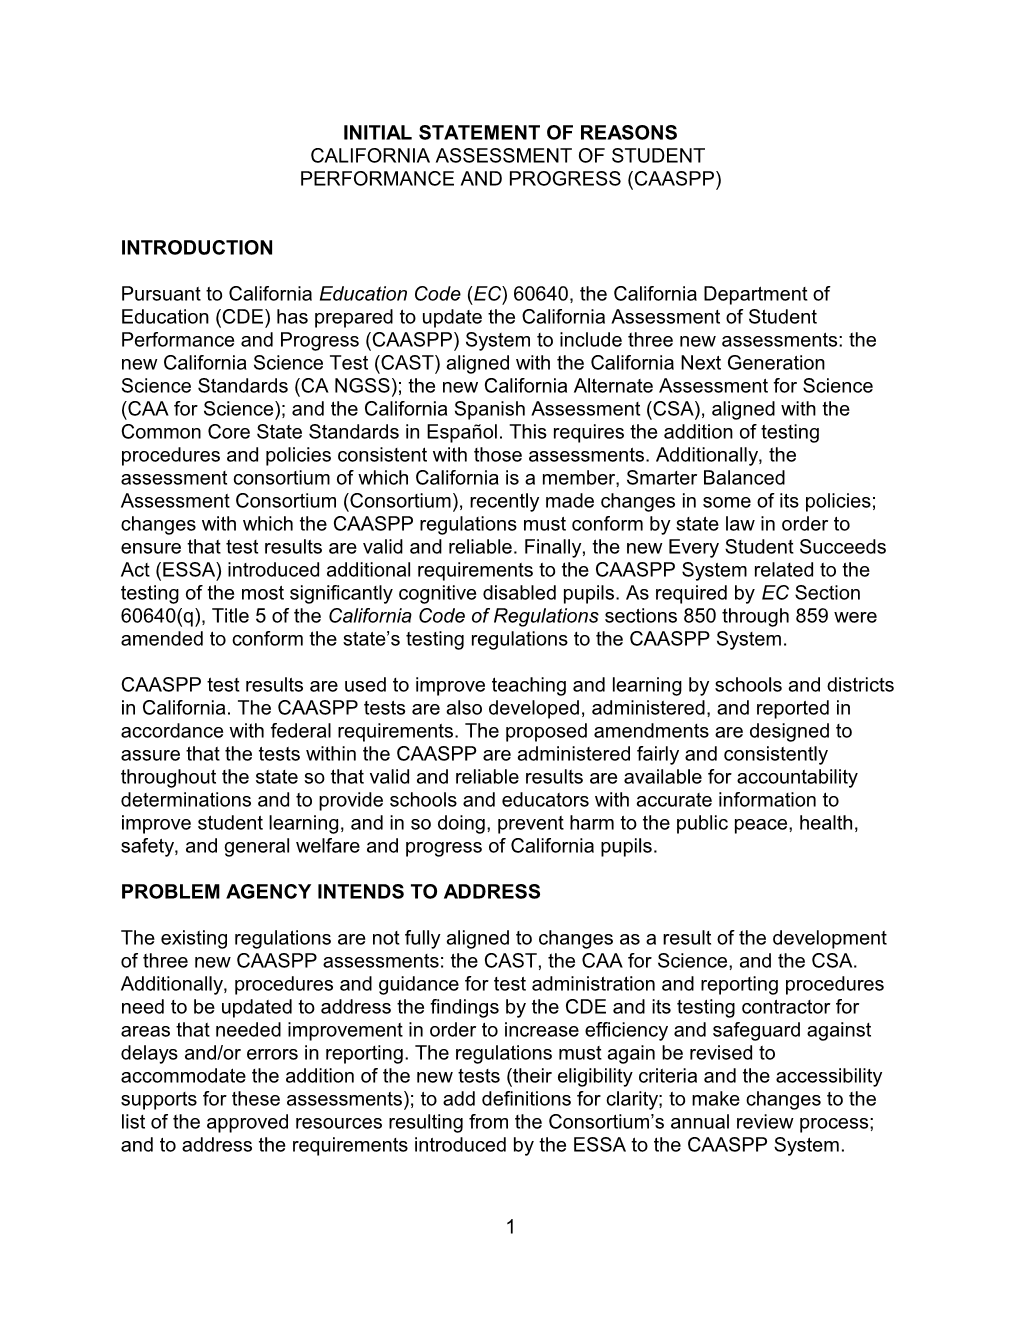 CAASPP Initial Statement of Reasons - Laws and Regulations (CA Dept of Education)